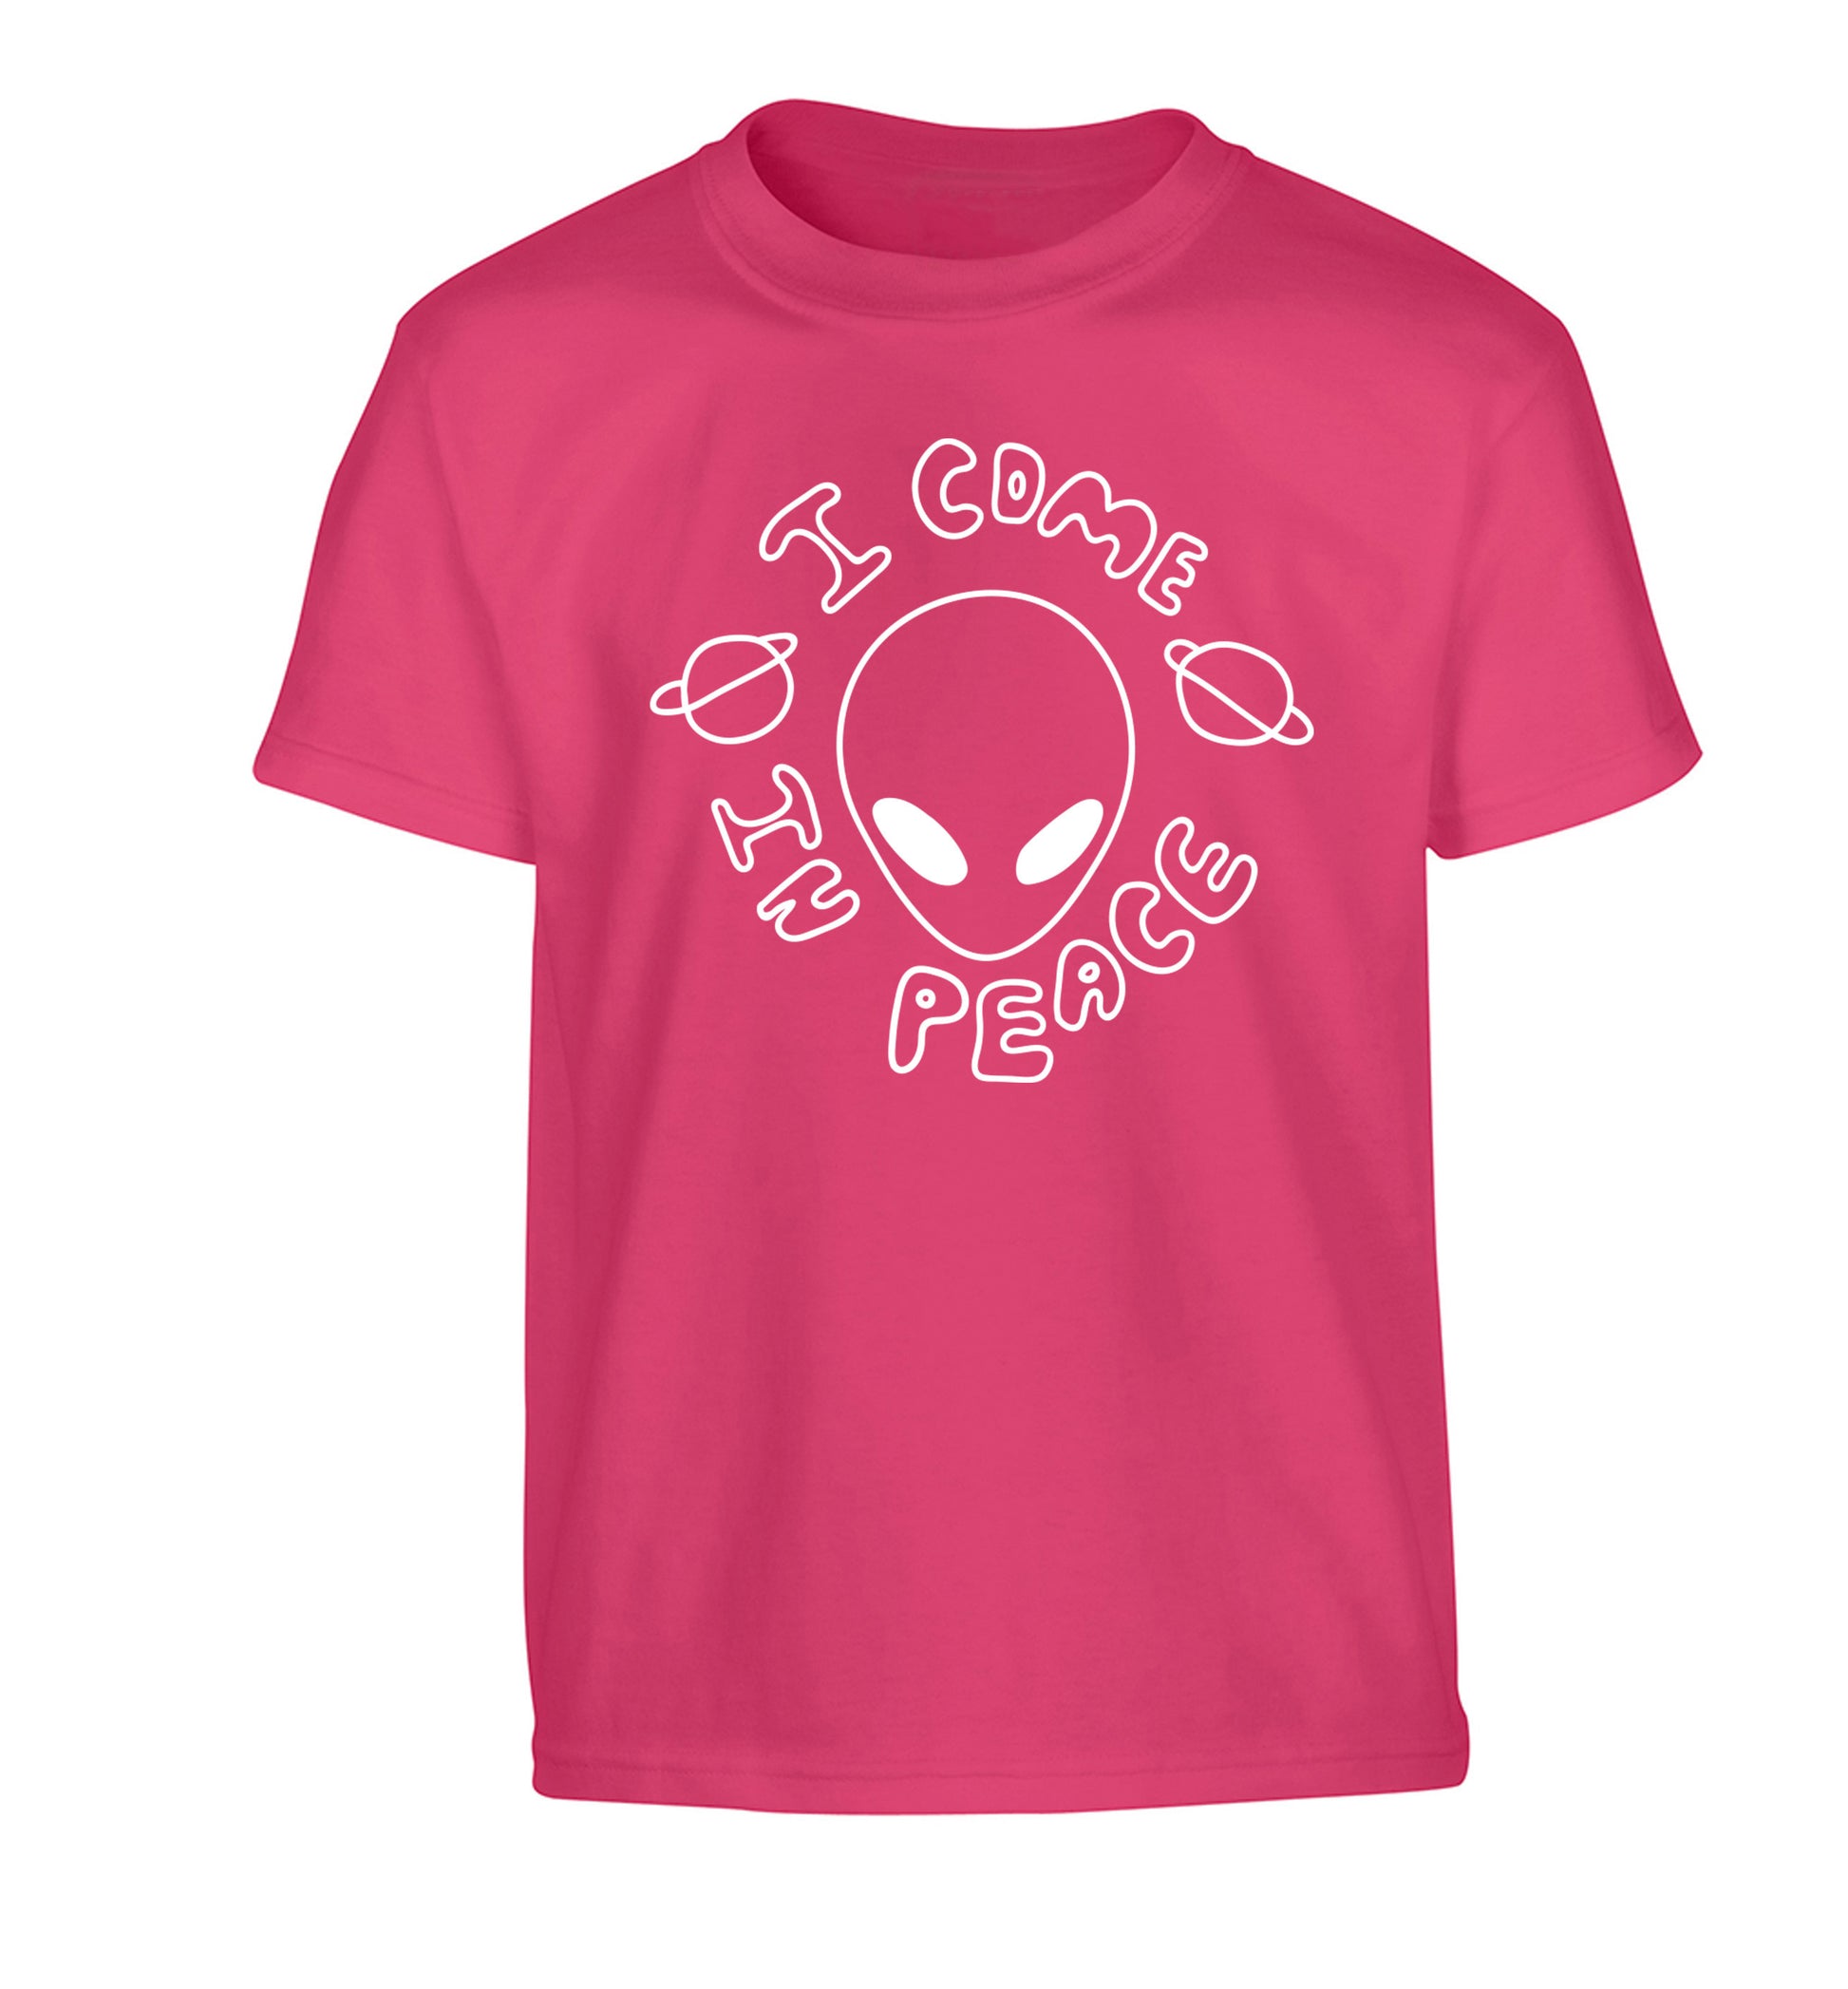 I come in peace Children's pink Tshirt 12-14 Years